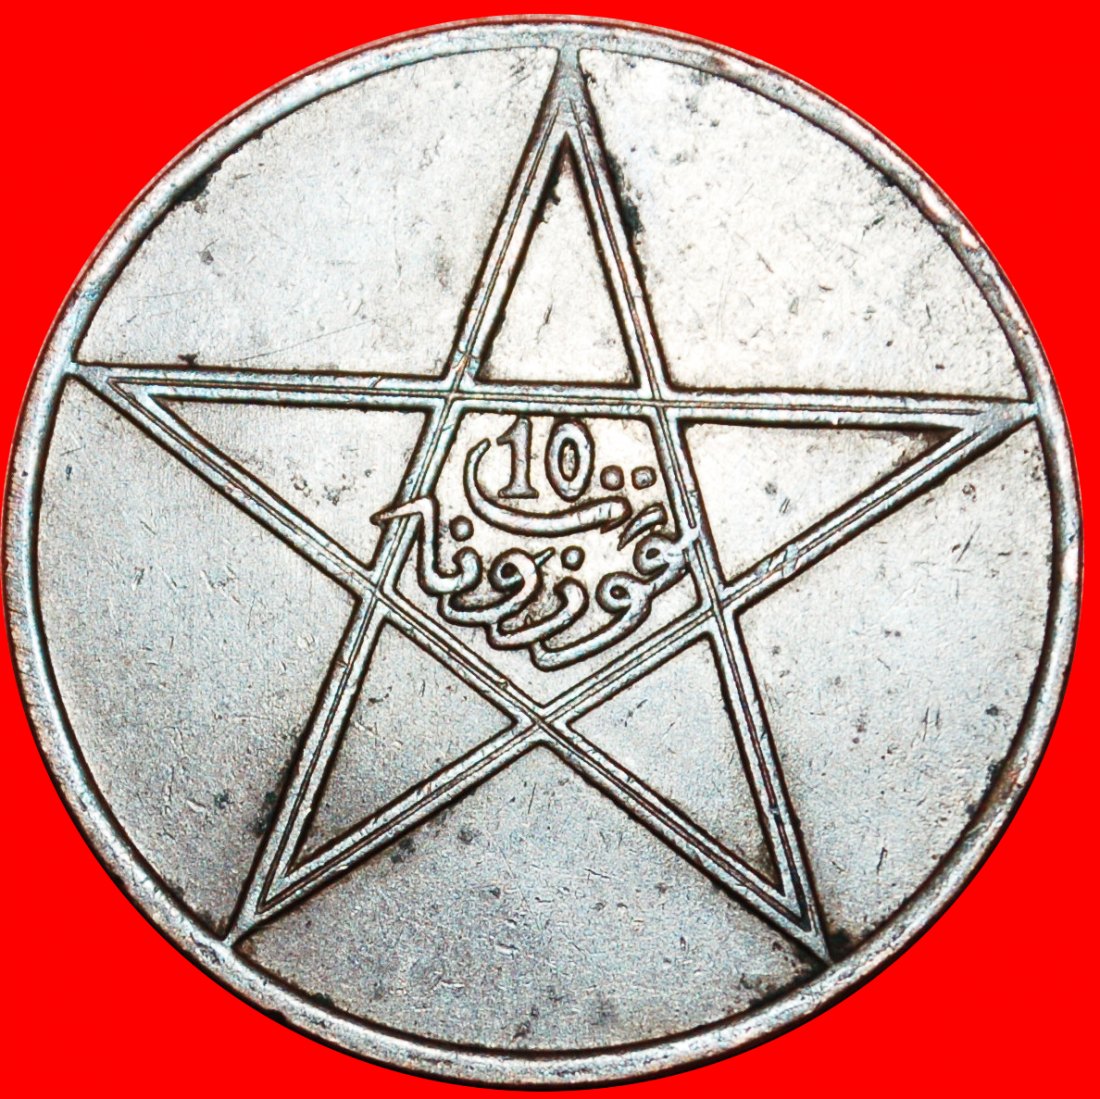  * PROTECTORATE OF FRANCE: MOROCCO ★ 10 MAZUNAS 1340 (1922)! YUSUF (1912-1927) LOW START!★NO RESERVE!   